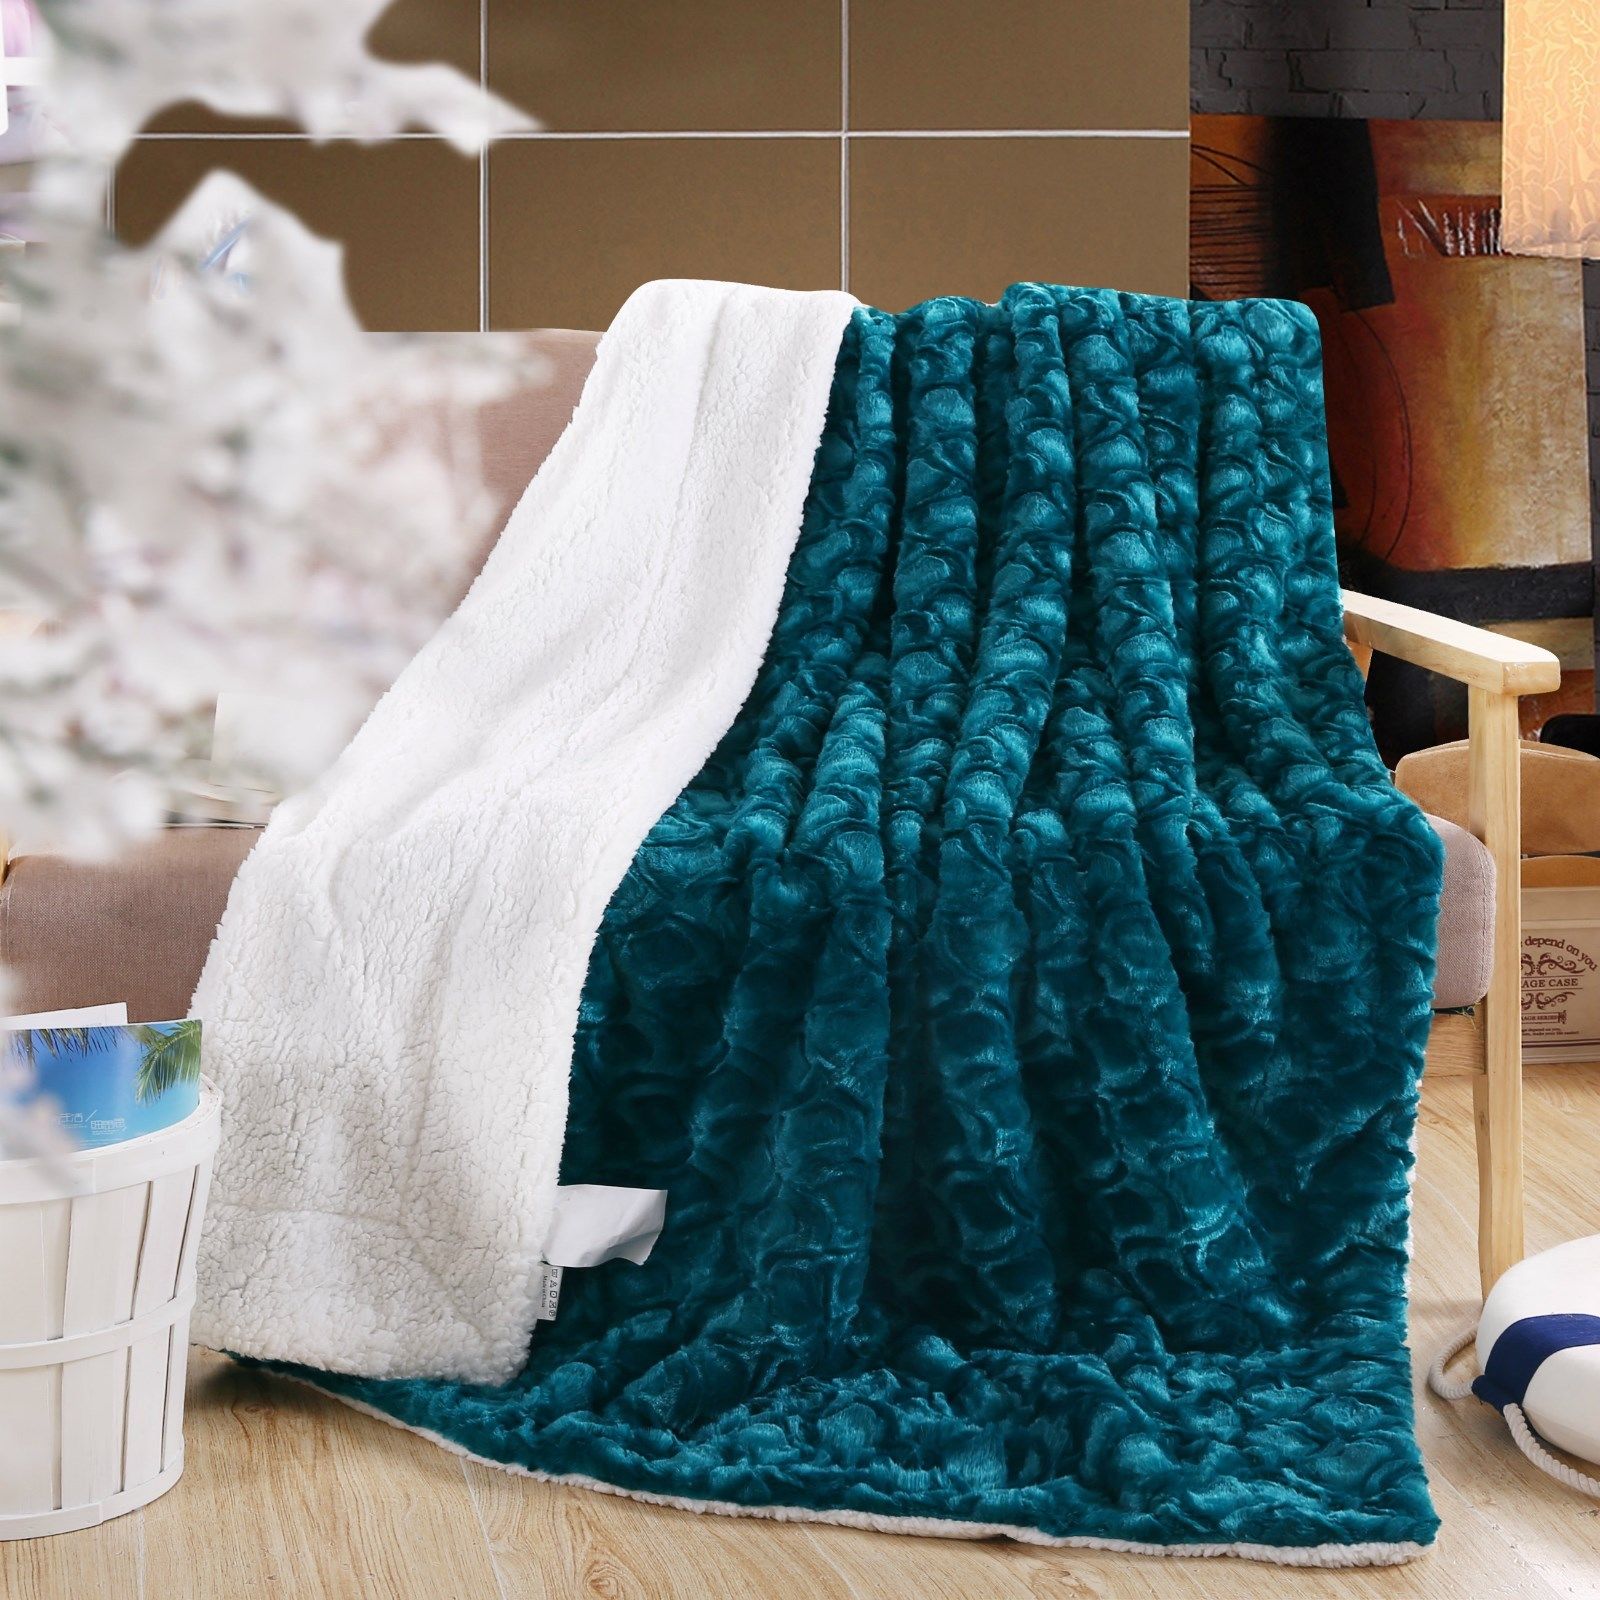 Scale Blanket Mermaid Scale Throw Blanket Blue Fish Scale Printed Sherpa Fleece Blanket Soft Boys Girls Warm Blanket for Bedroom Couch Sofa Twin , Scale 60x80